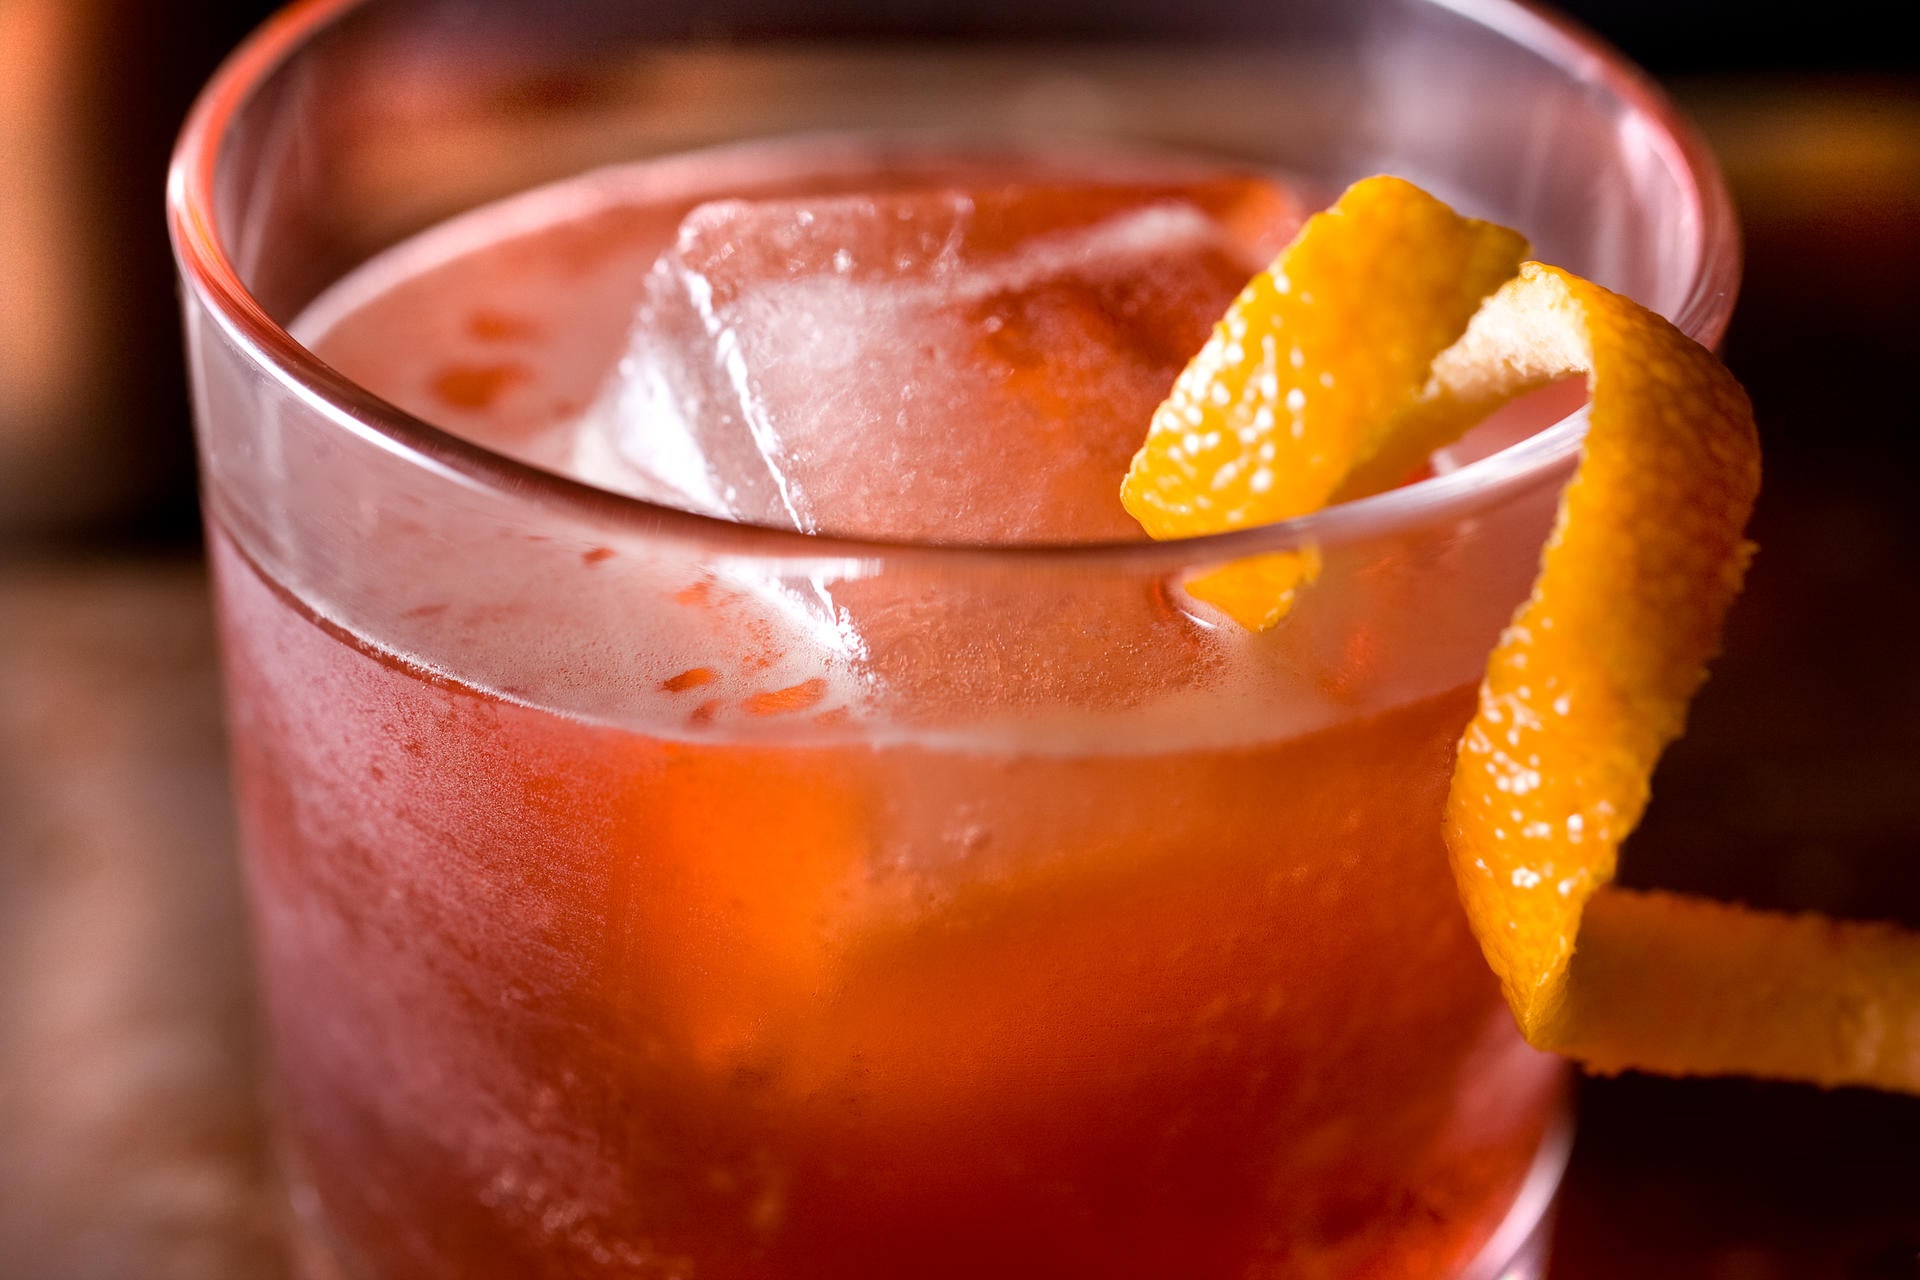 THIRSTY THURSDAY? TIME FOR A NEGRONI...